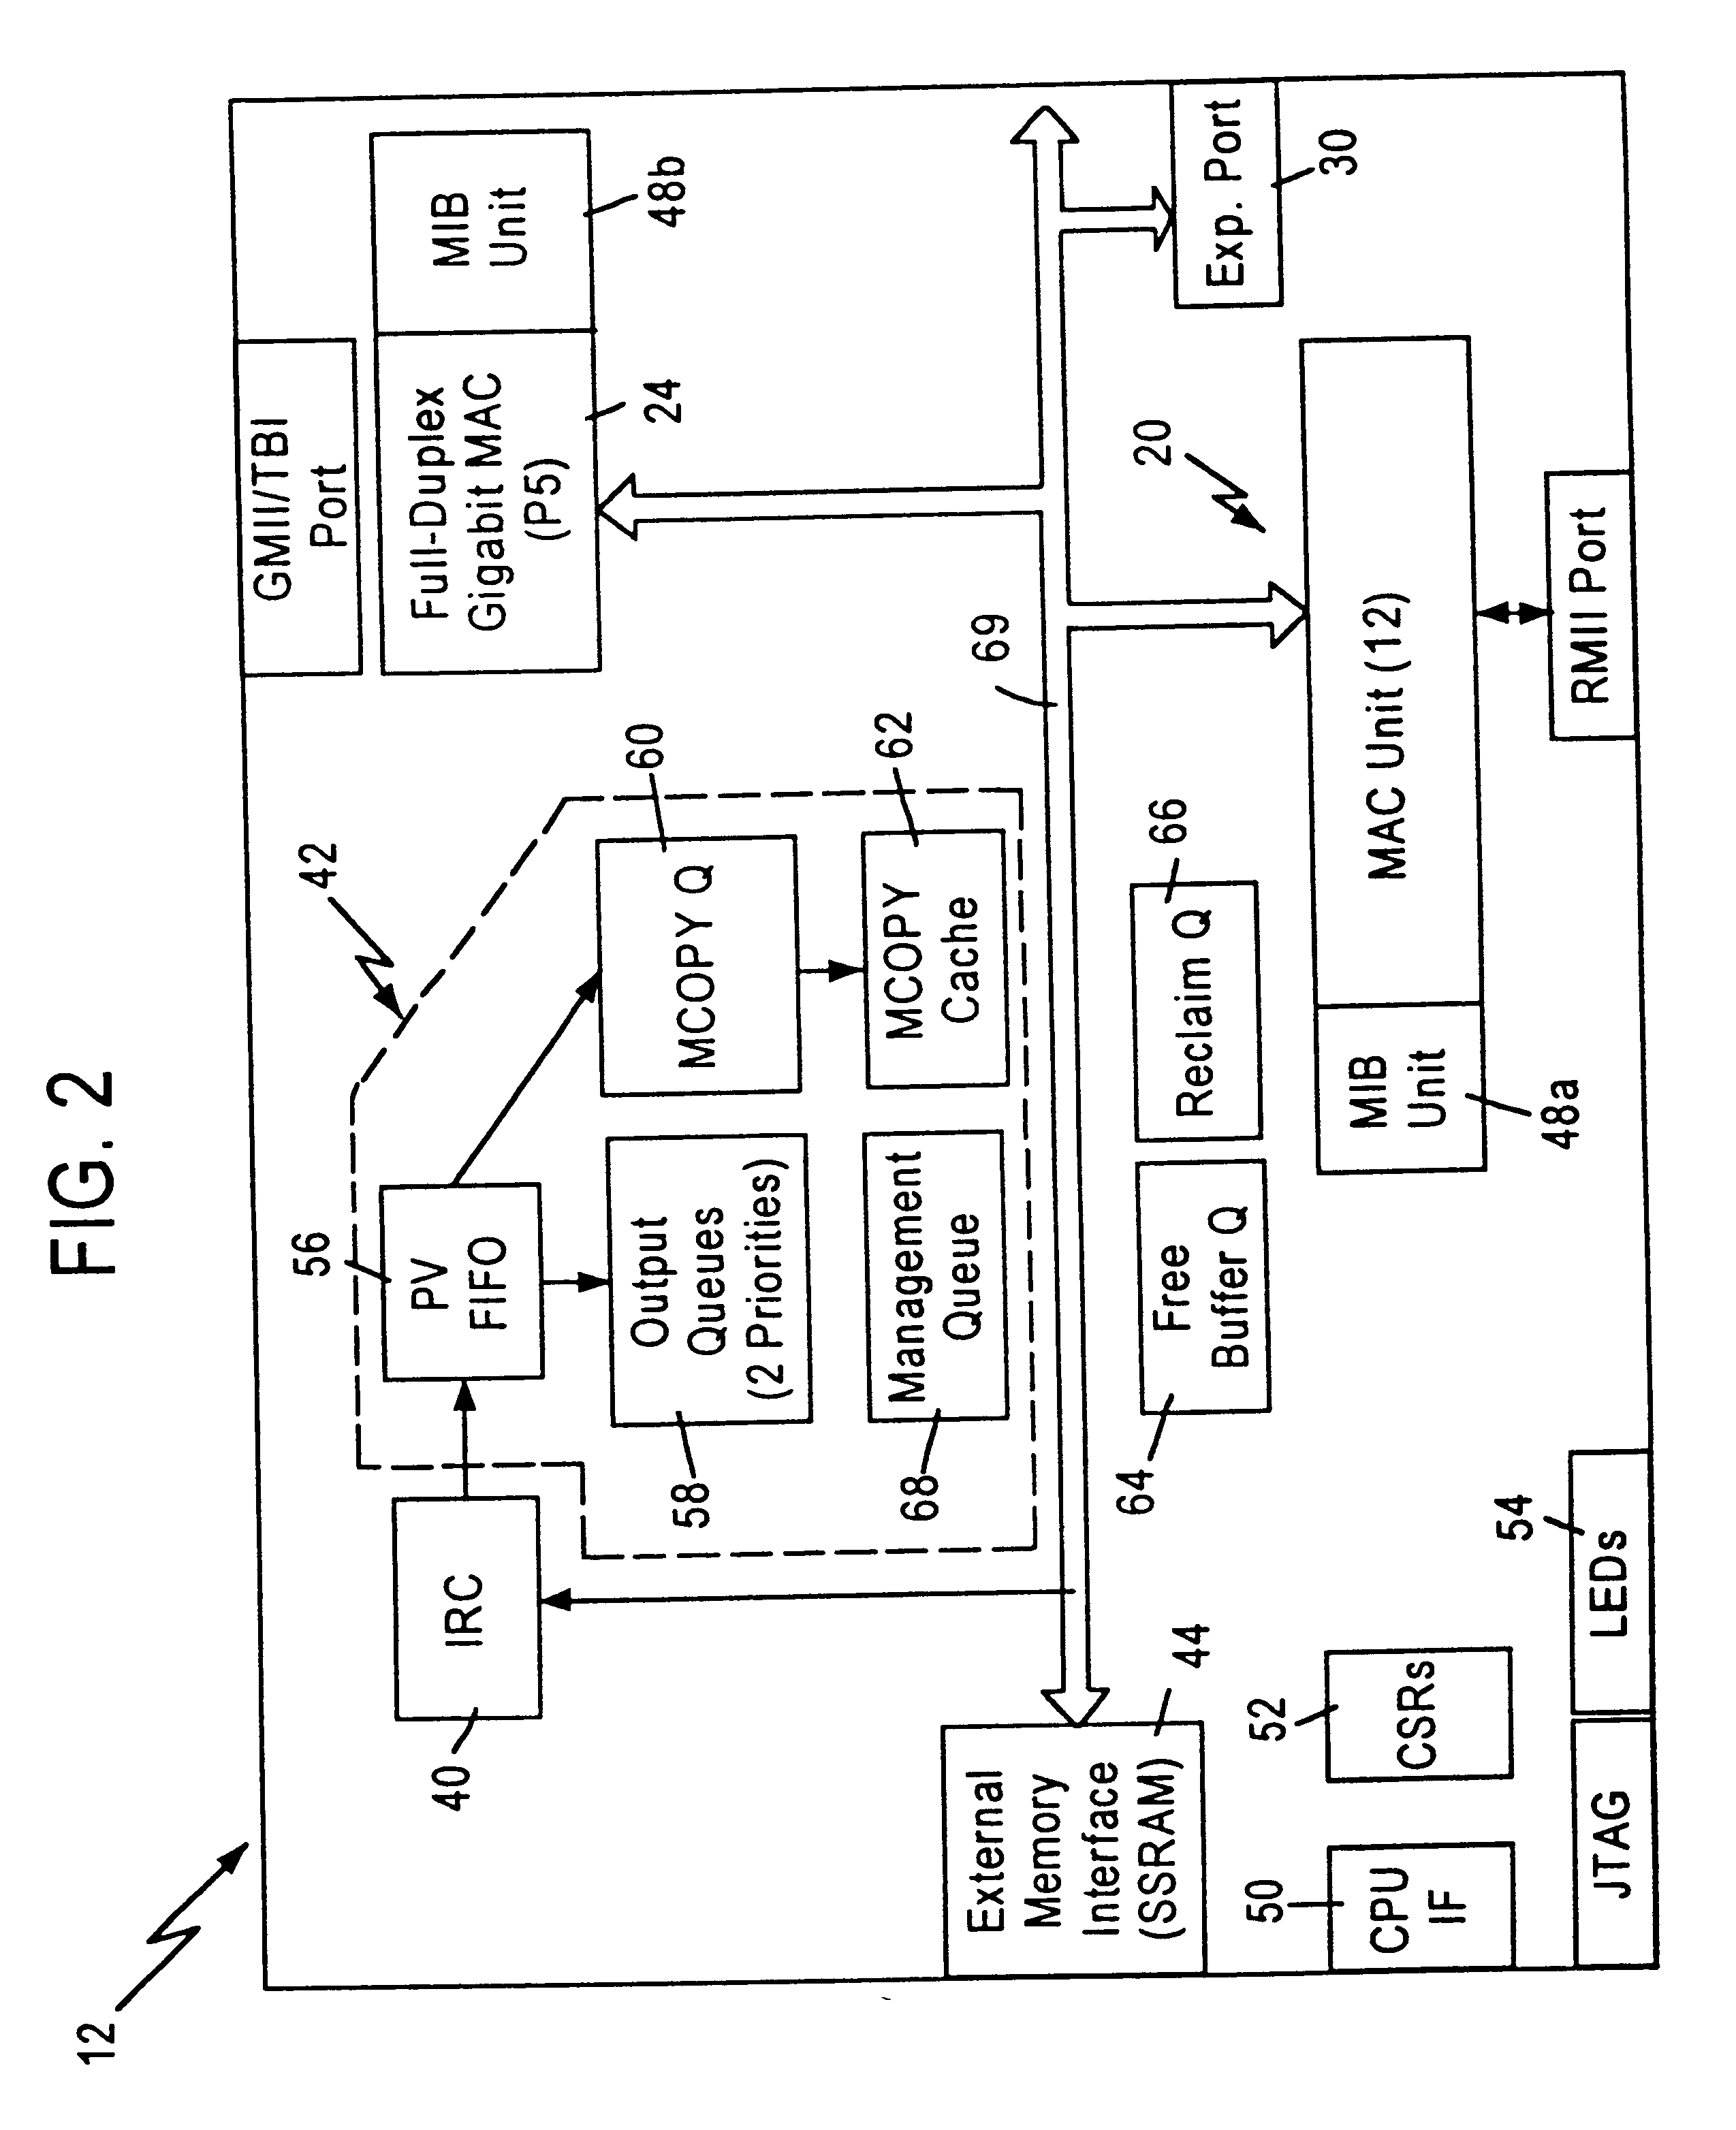 Apparatus and method for sharing an external memory between multiple network switches